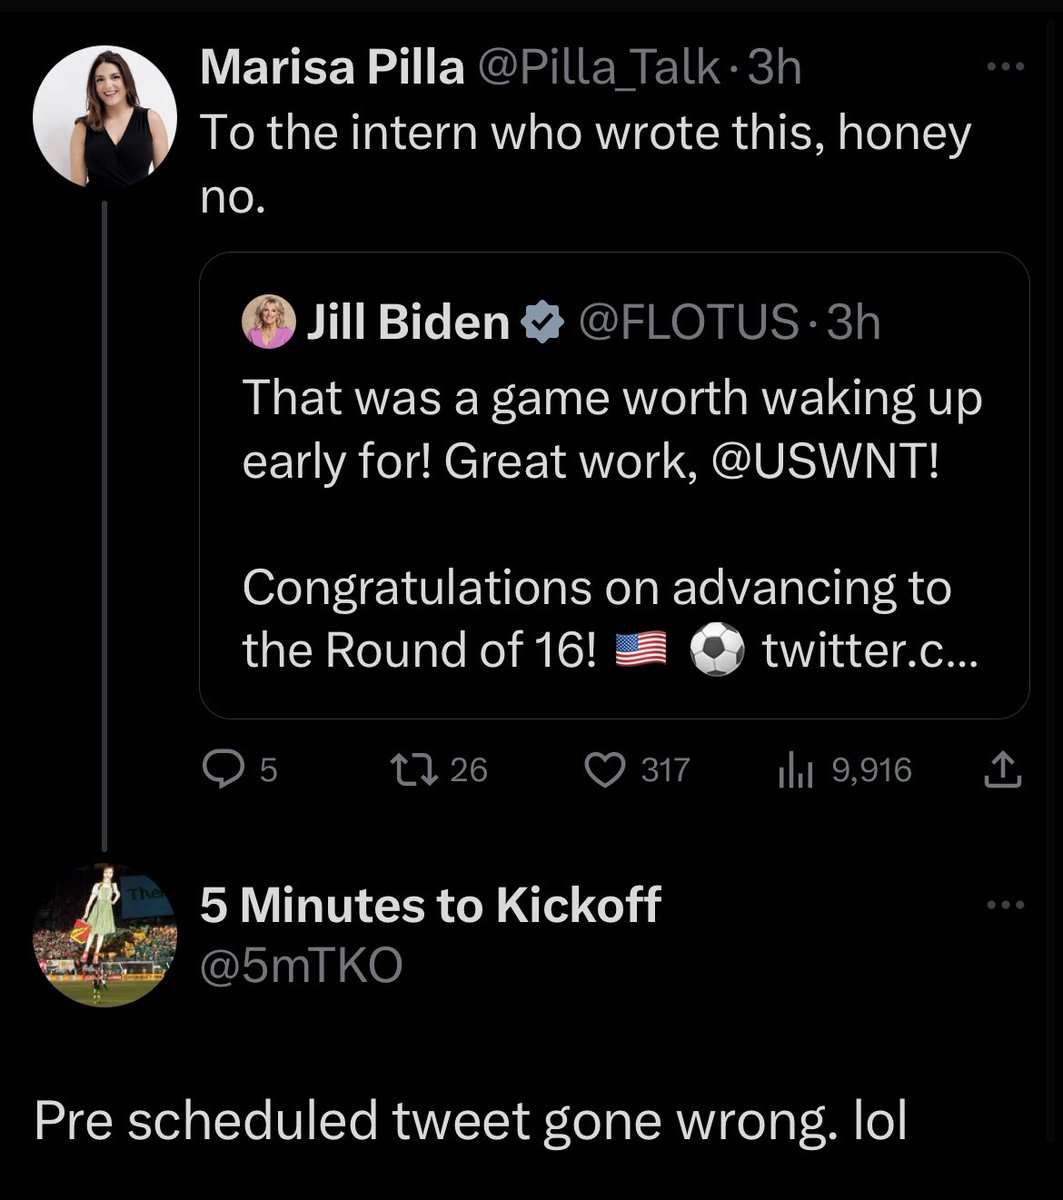 Interns don’t write tweets for world leaders, also how could it have been a scheduled post if the content of the post is tied directly the outcome of the match????????? I need to go back to sleep